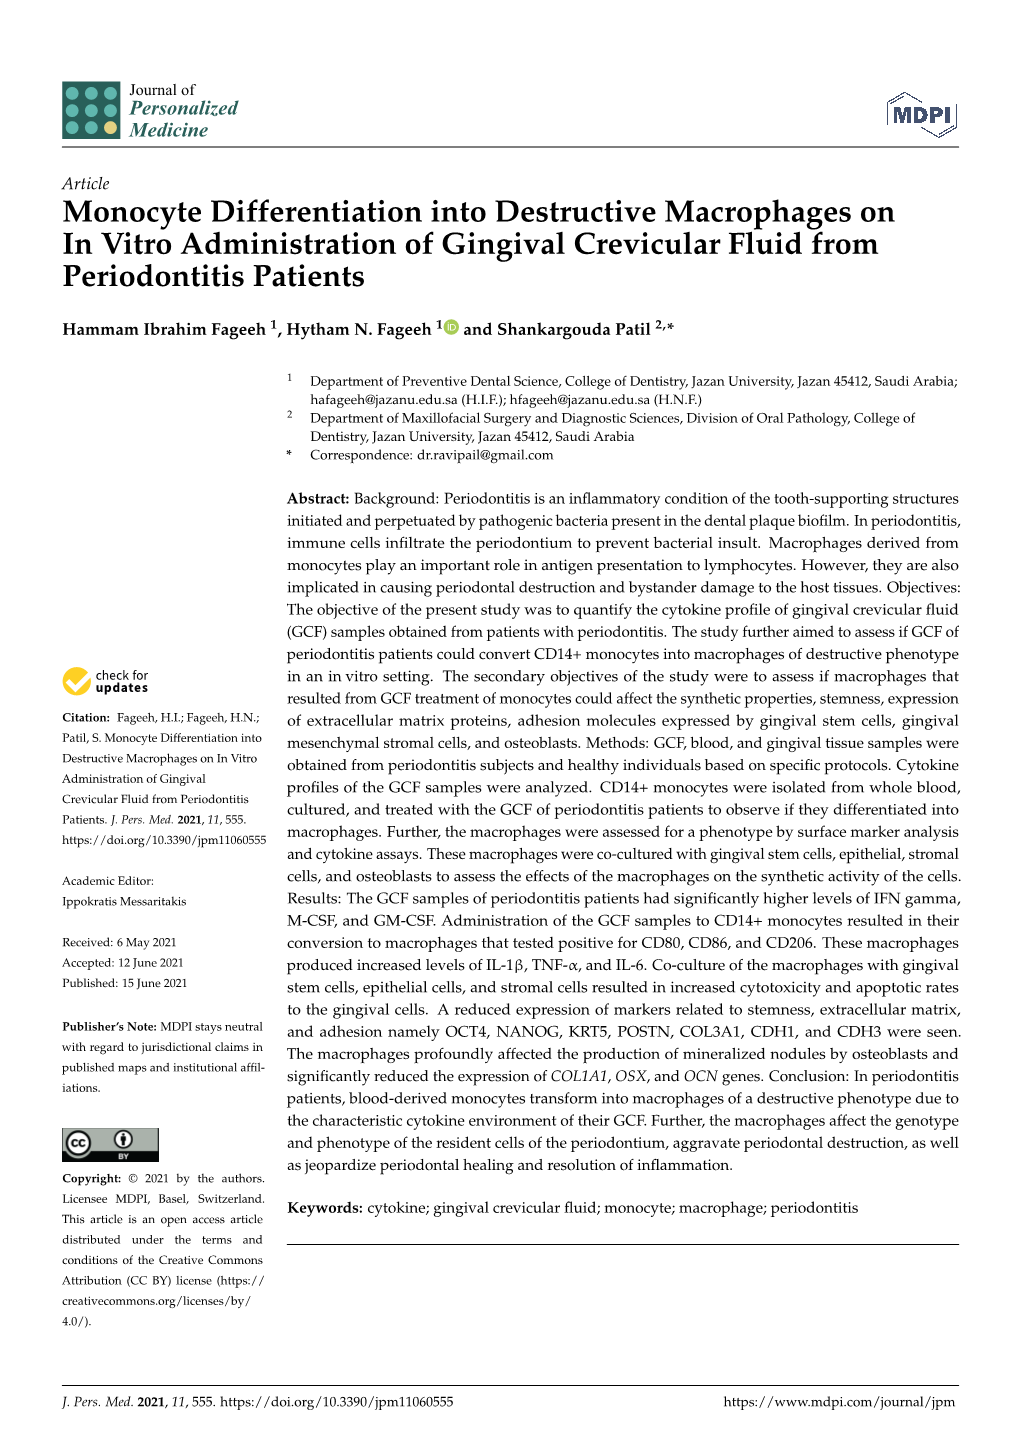 Monocyte Differentiation Into Destructive Macrophages on in Vitro Administration of Gingival Crevicular Fluid from Periodontitis Patients